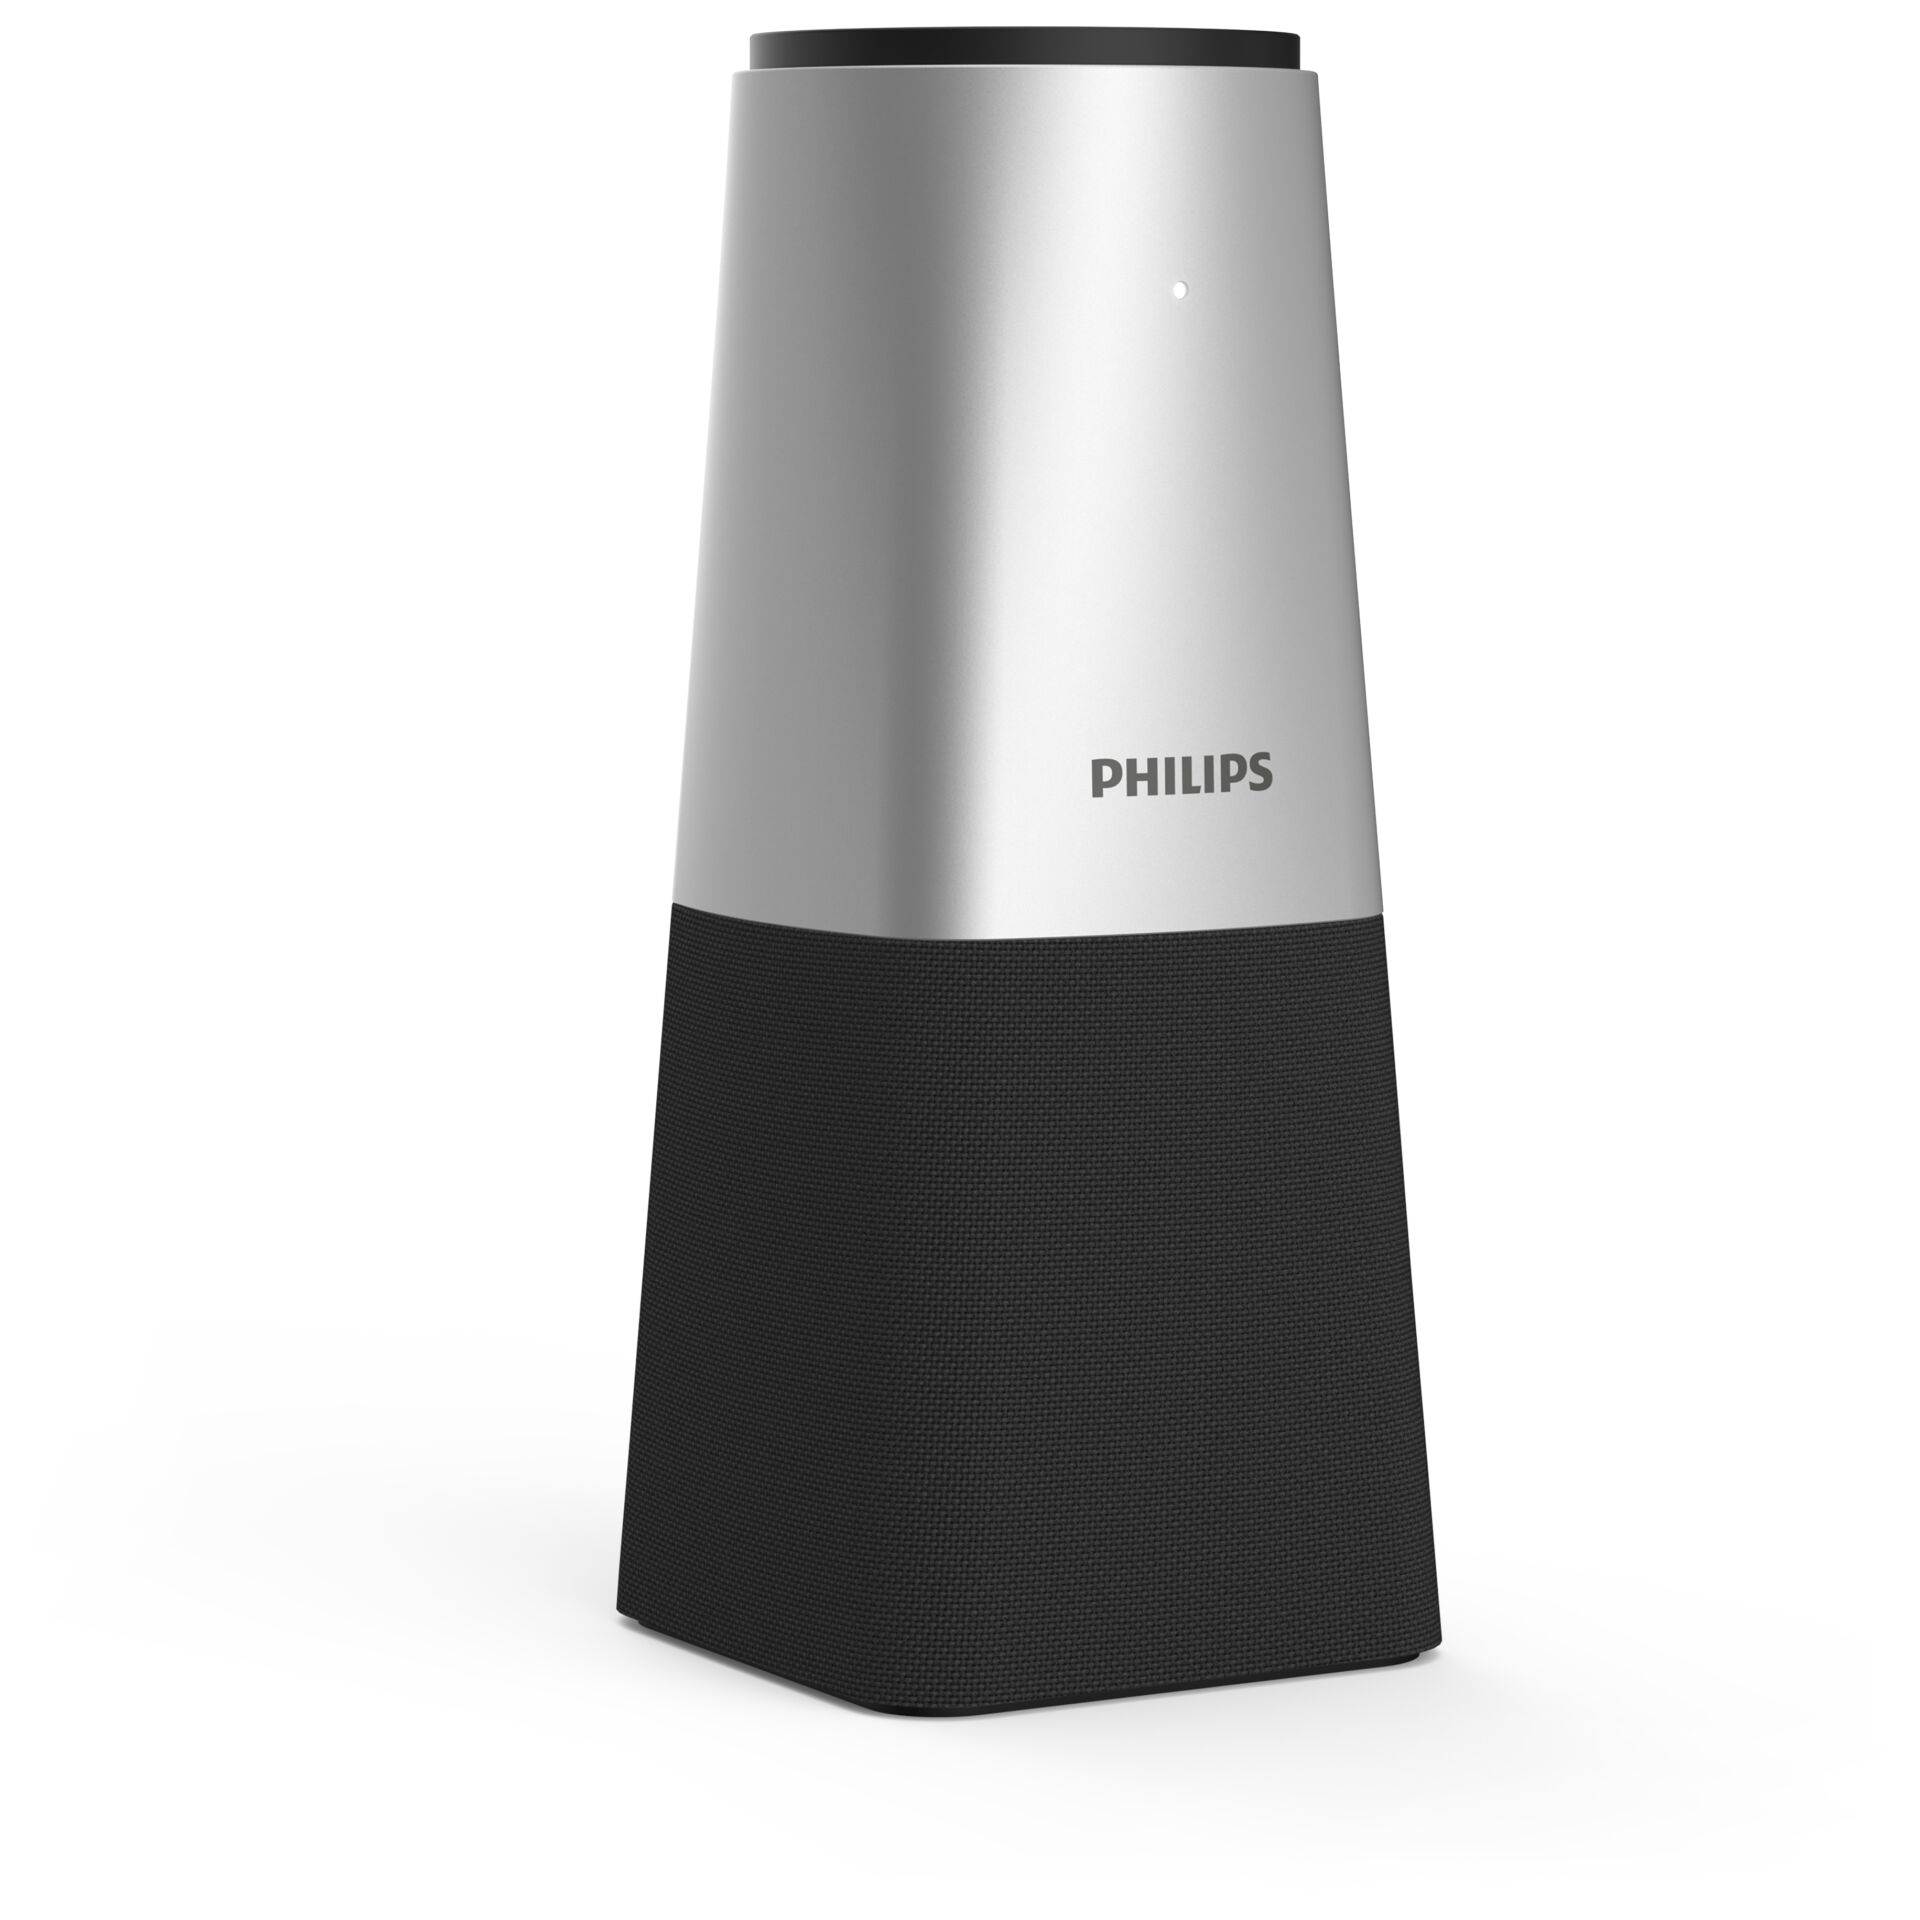 Philips PSE0540 Portable Conference Microphone